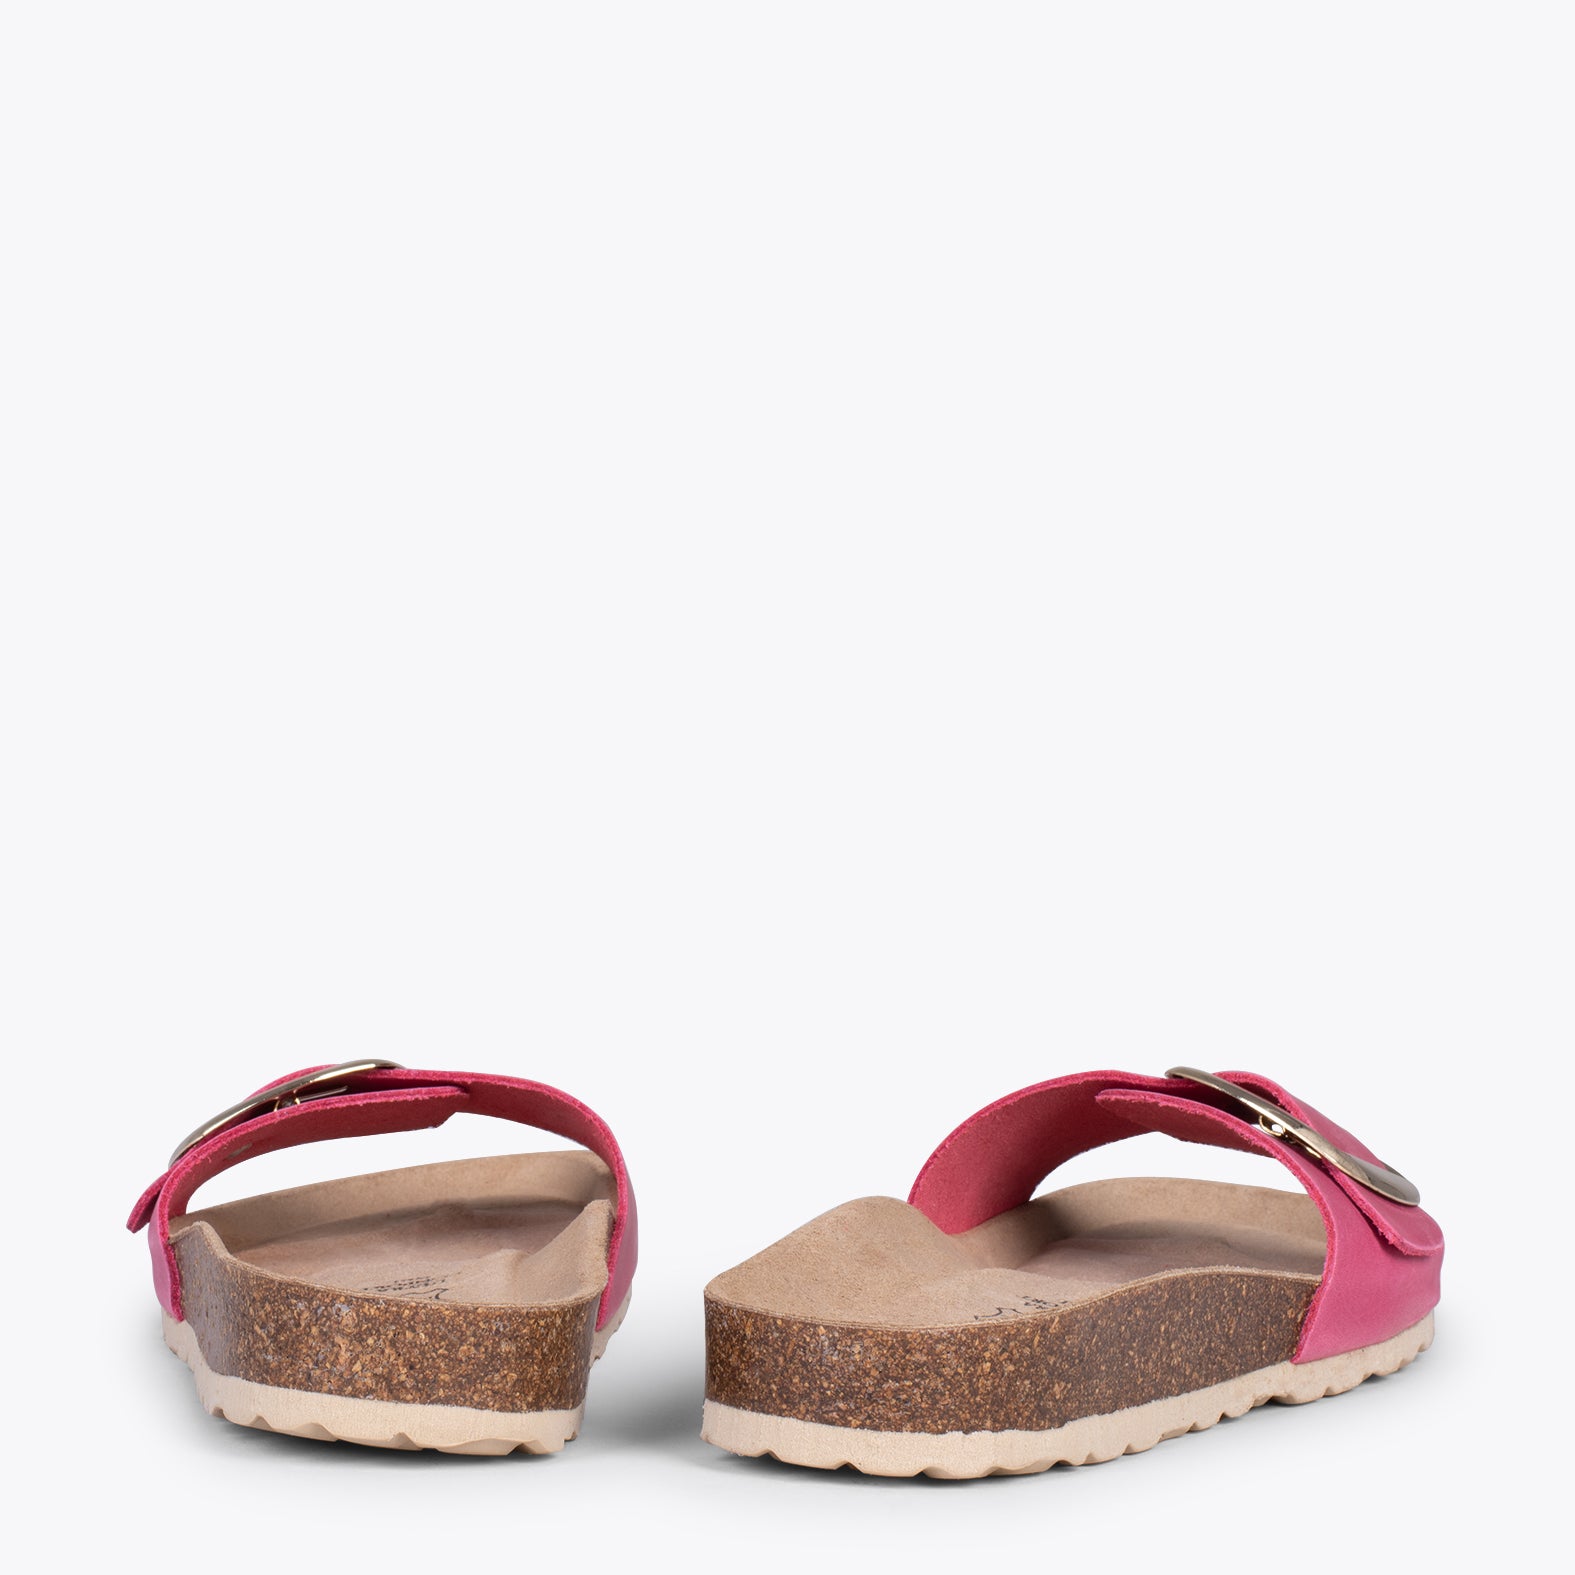 CLAVEL – FUCHSIA leather slides with buckle